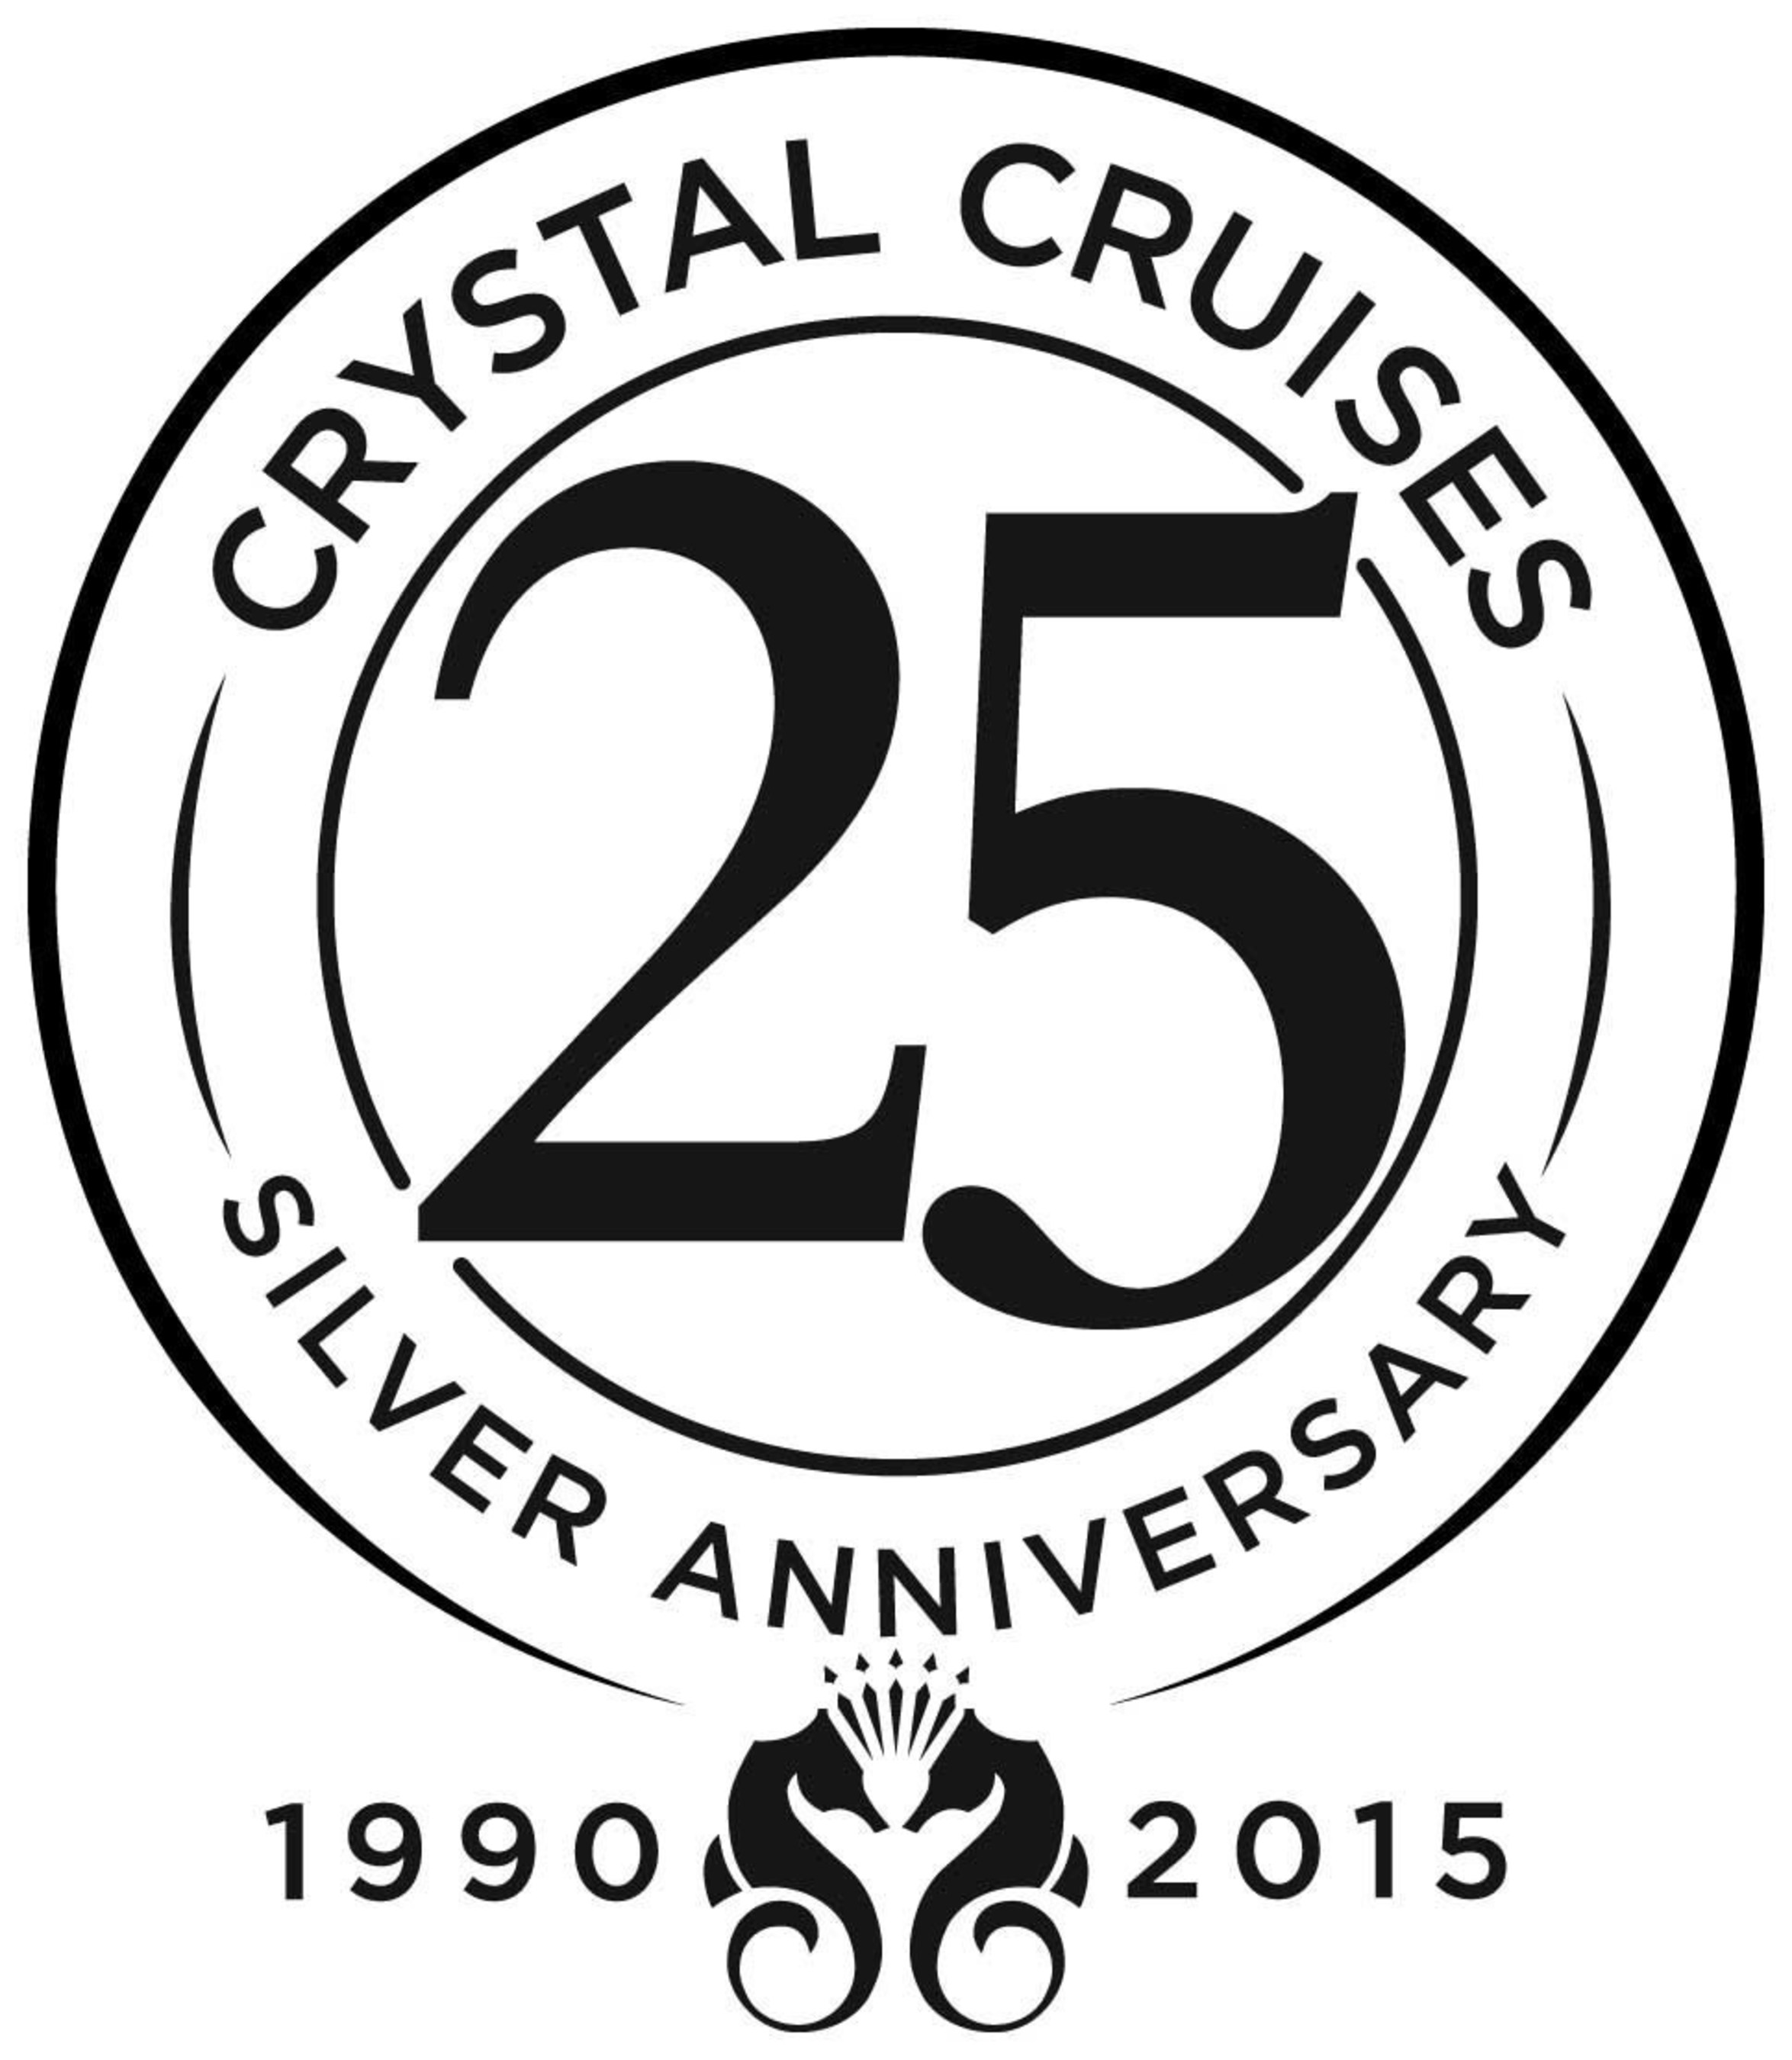 Crystal Cruises will be celebrating 25 years of sailing in 2015 with multiple theme cruises bringing back former Crystal captains, as well as current top executives.